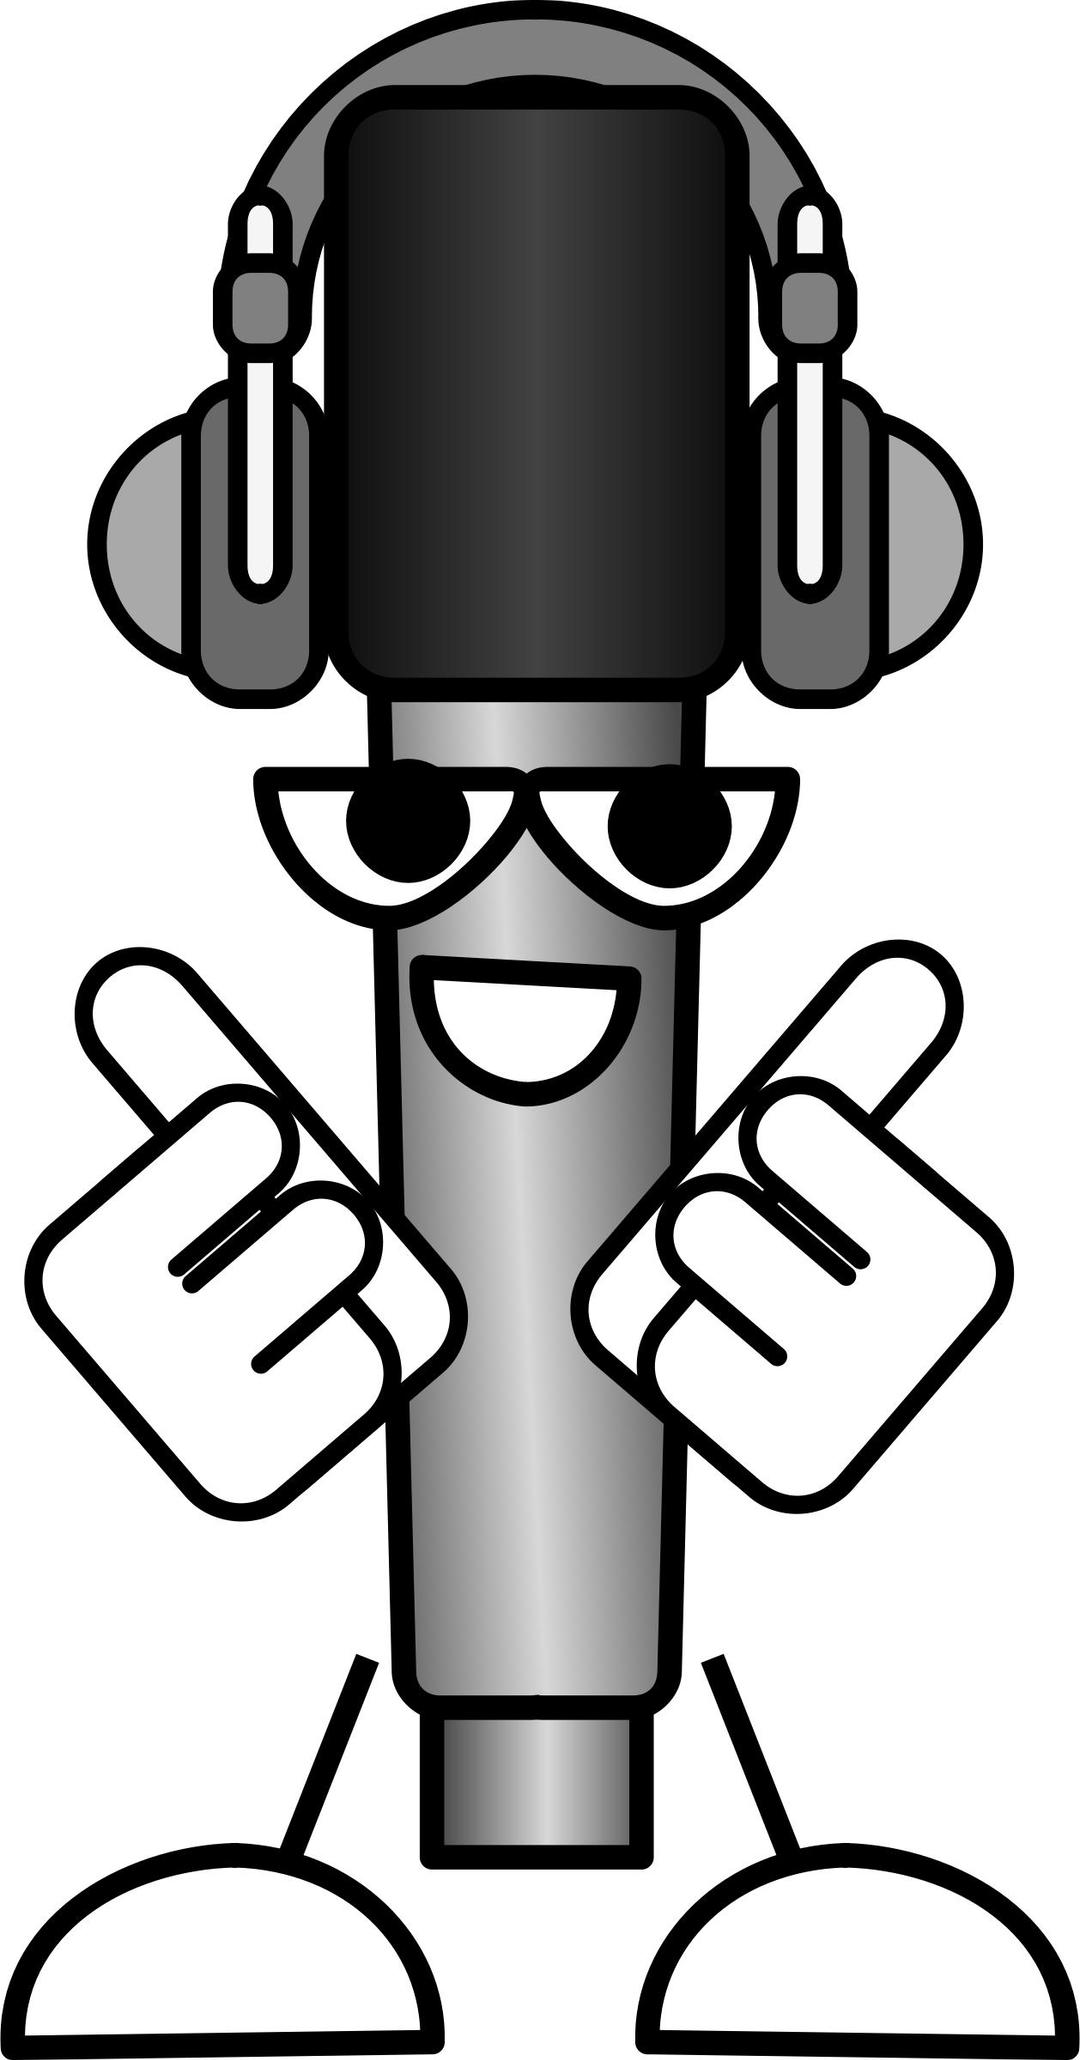 Mike the Mic with Headphones png transparent